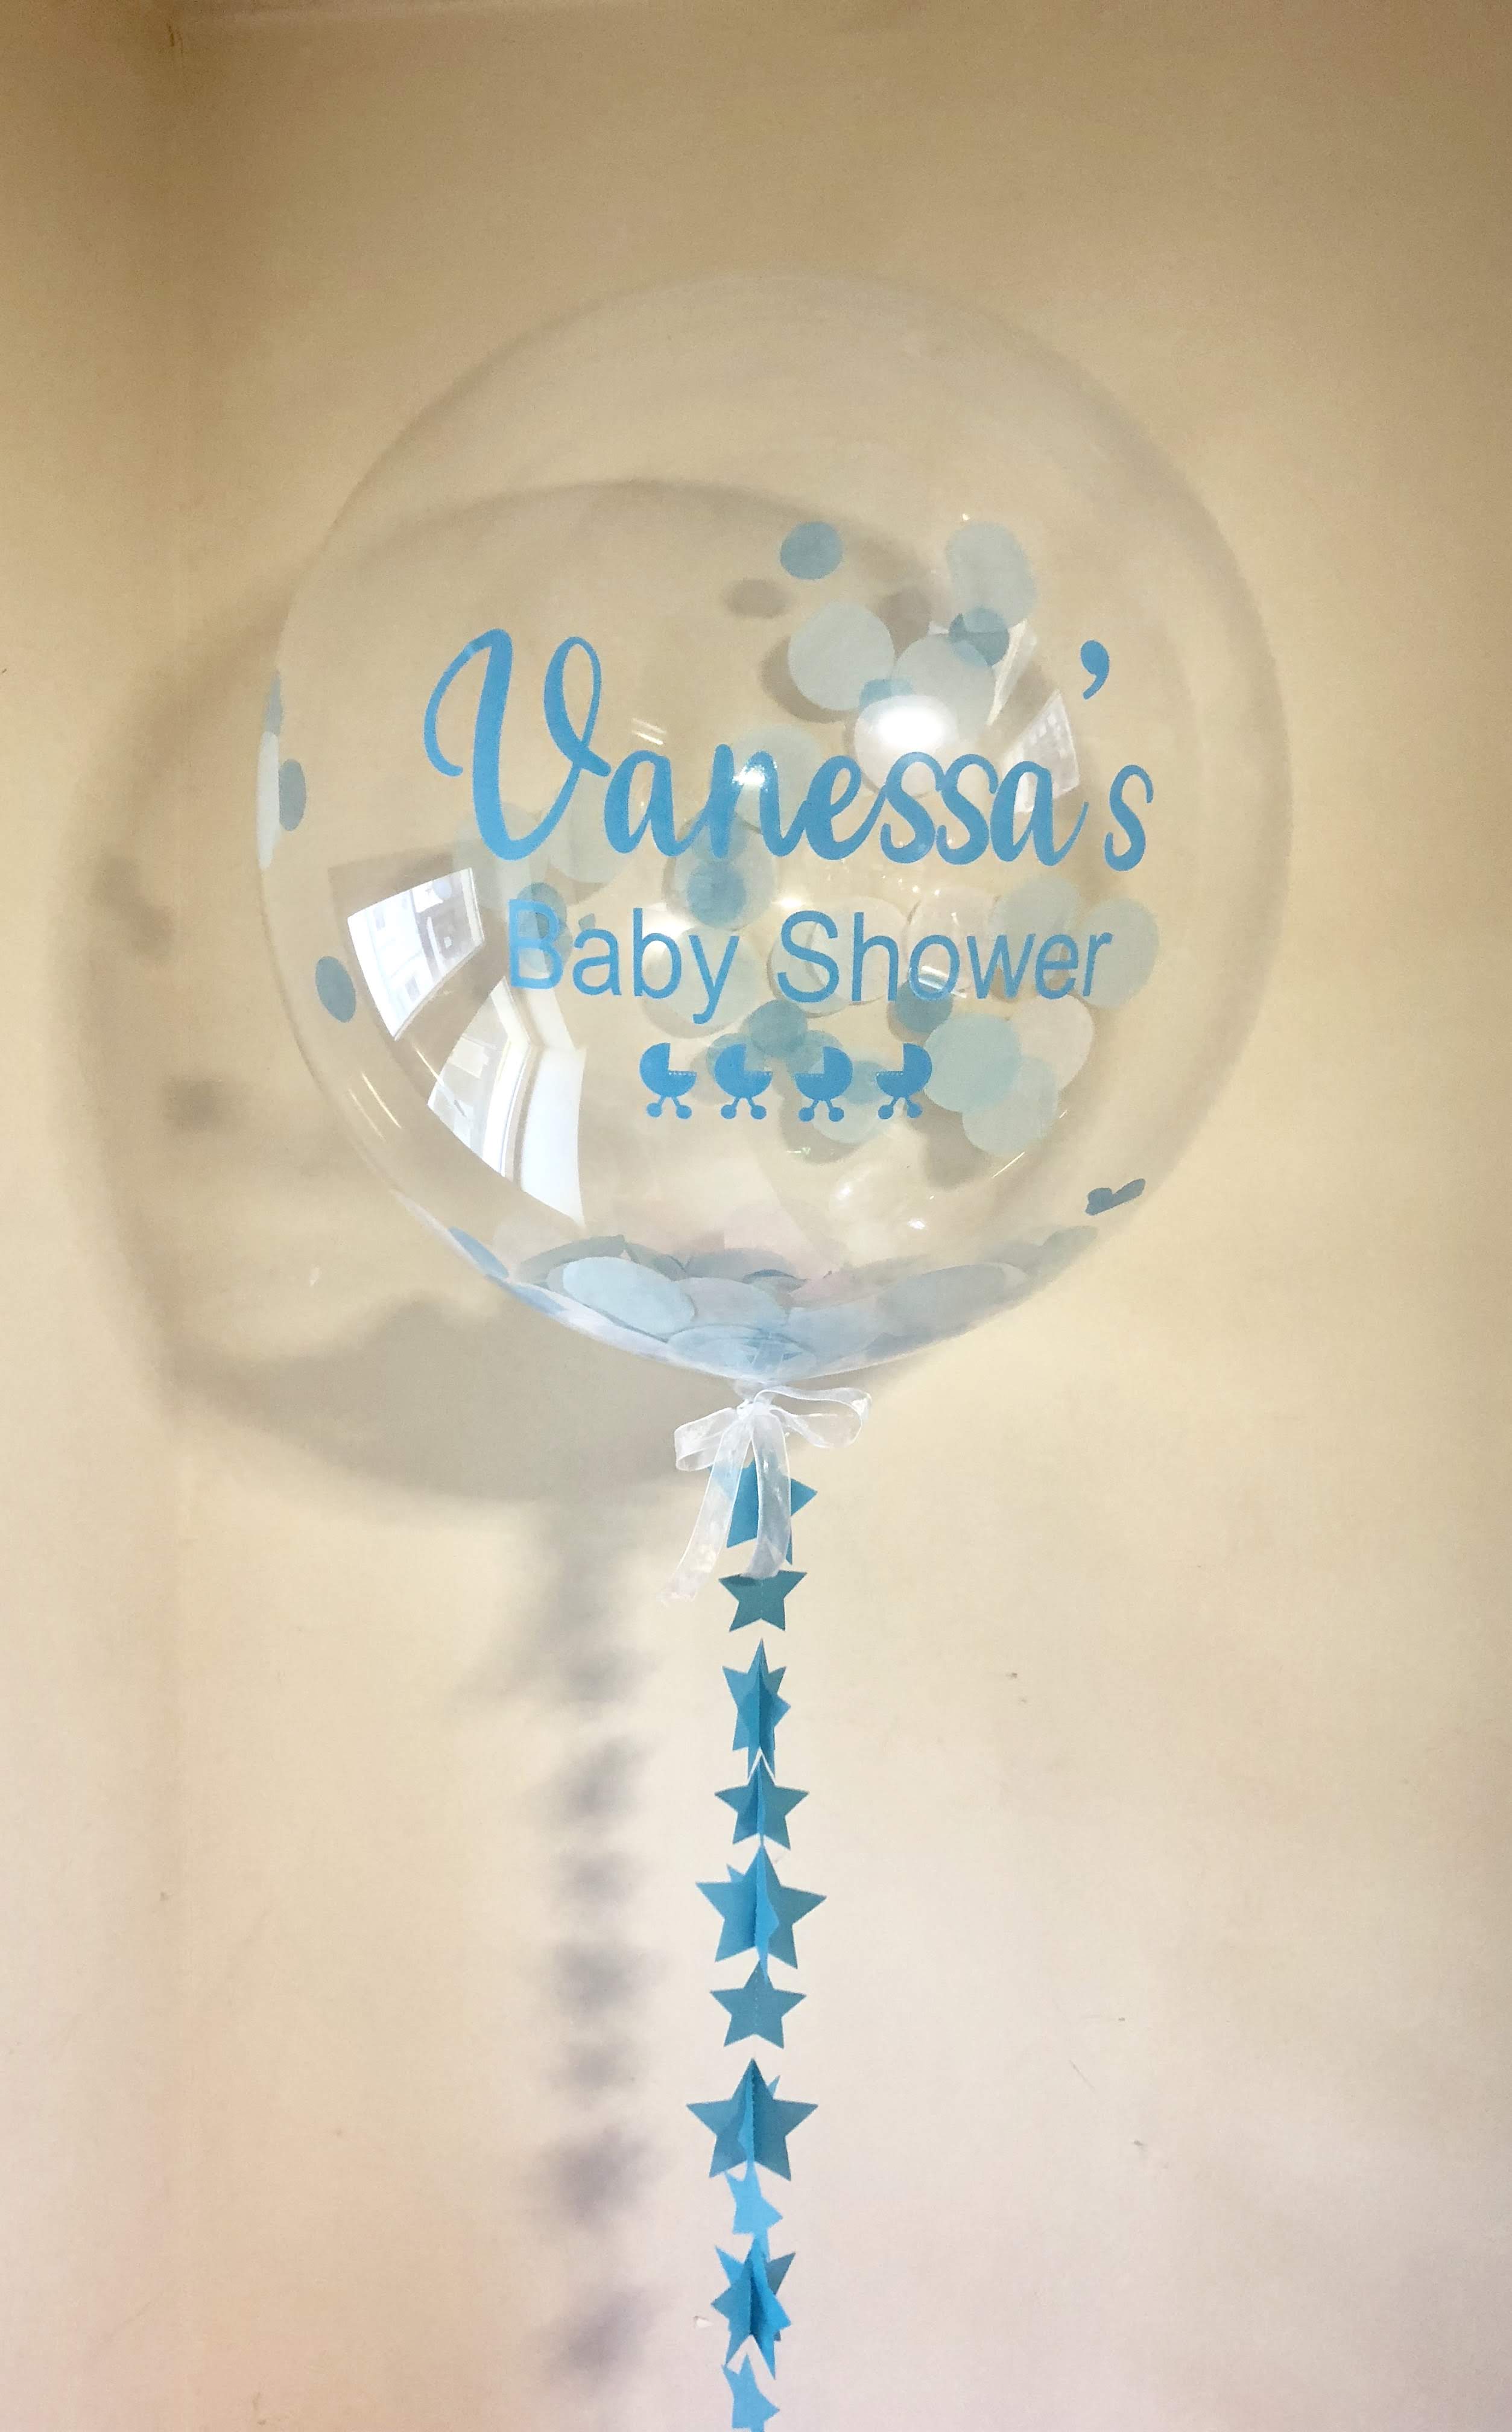 Baby shower balloon personalised for your baby shower celebration